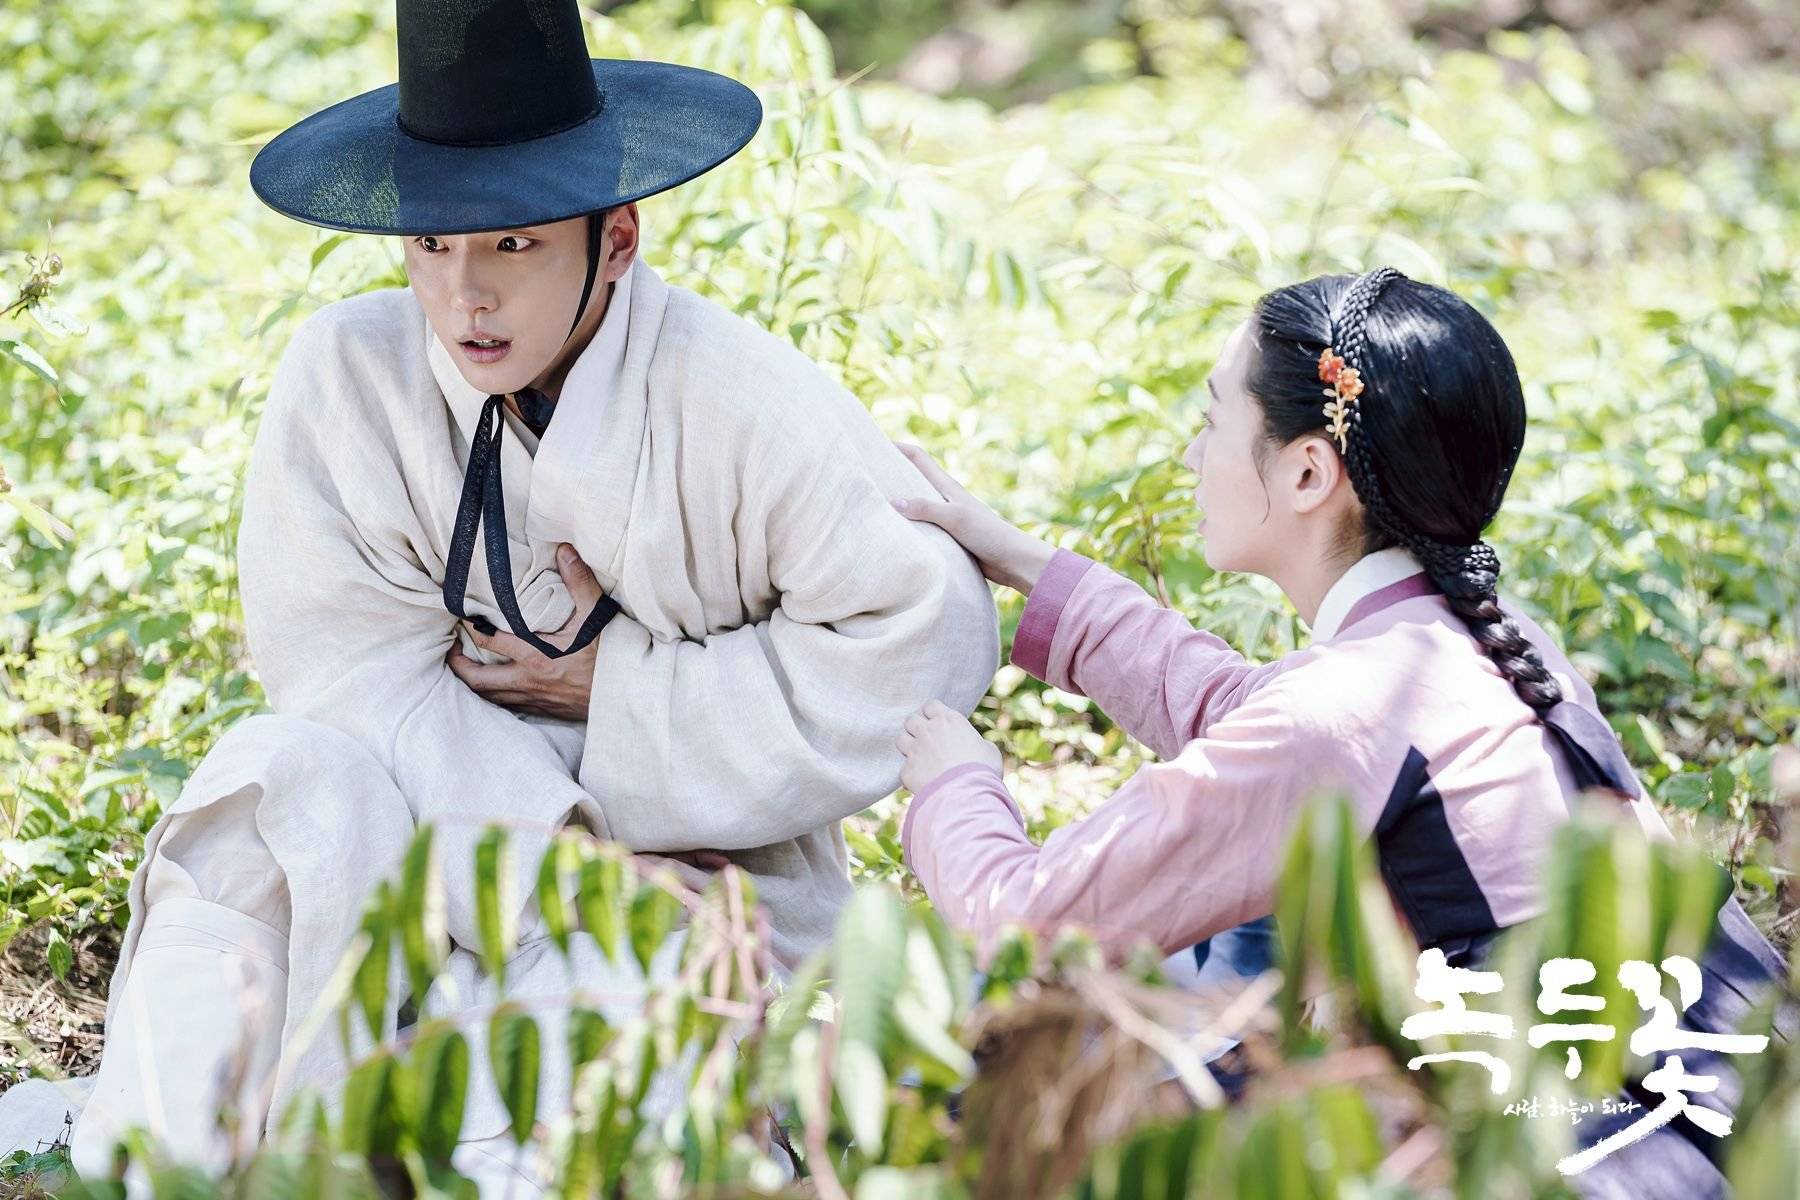 Photos New Stills And Behind The Scenes Images Added For The Korean Drama The Nokdu Flower Hancinema